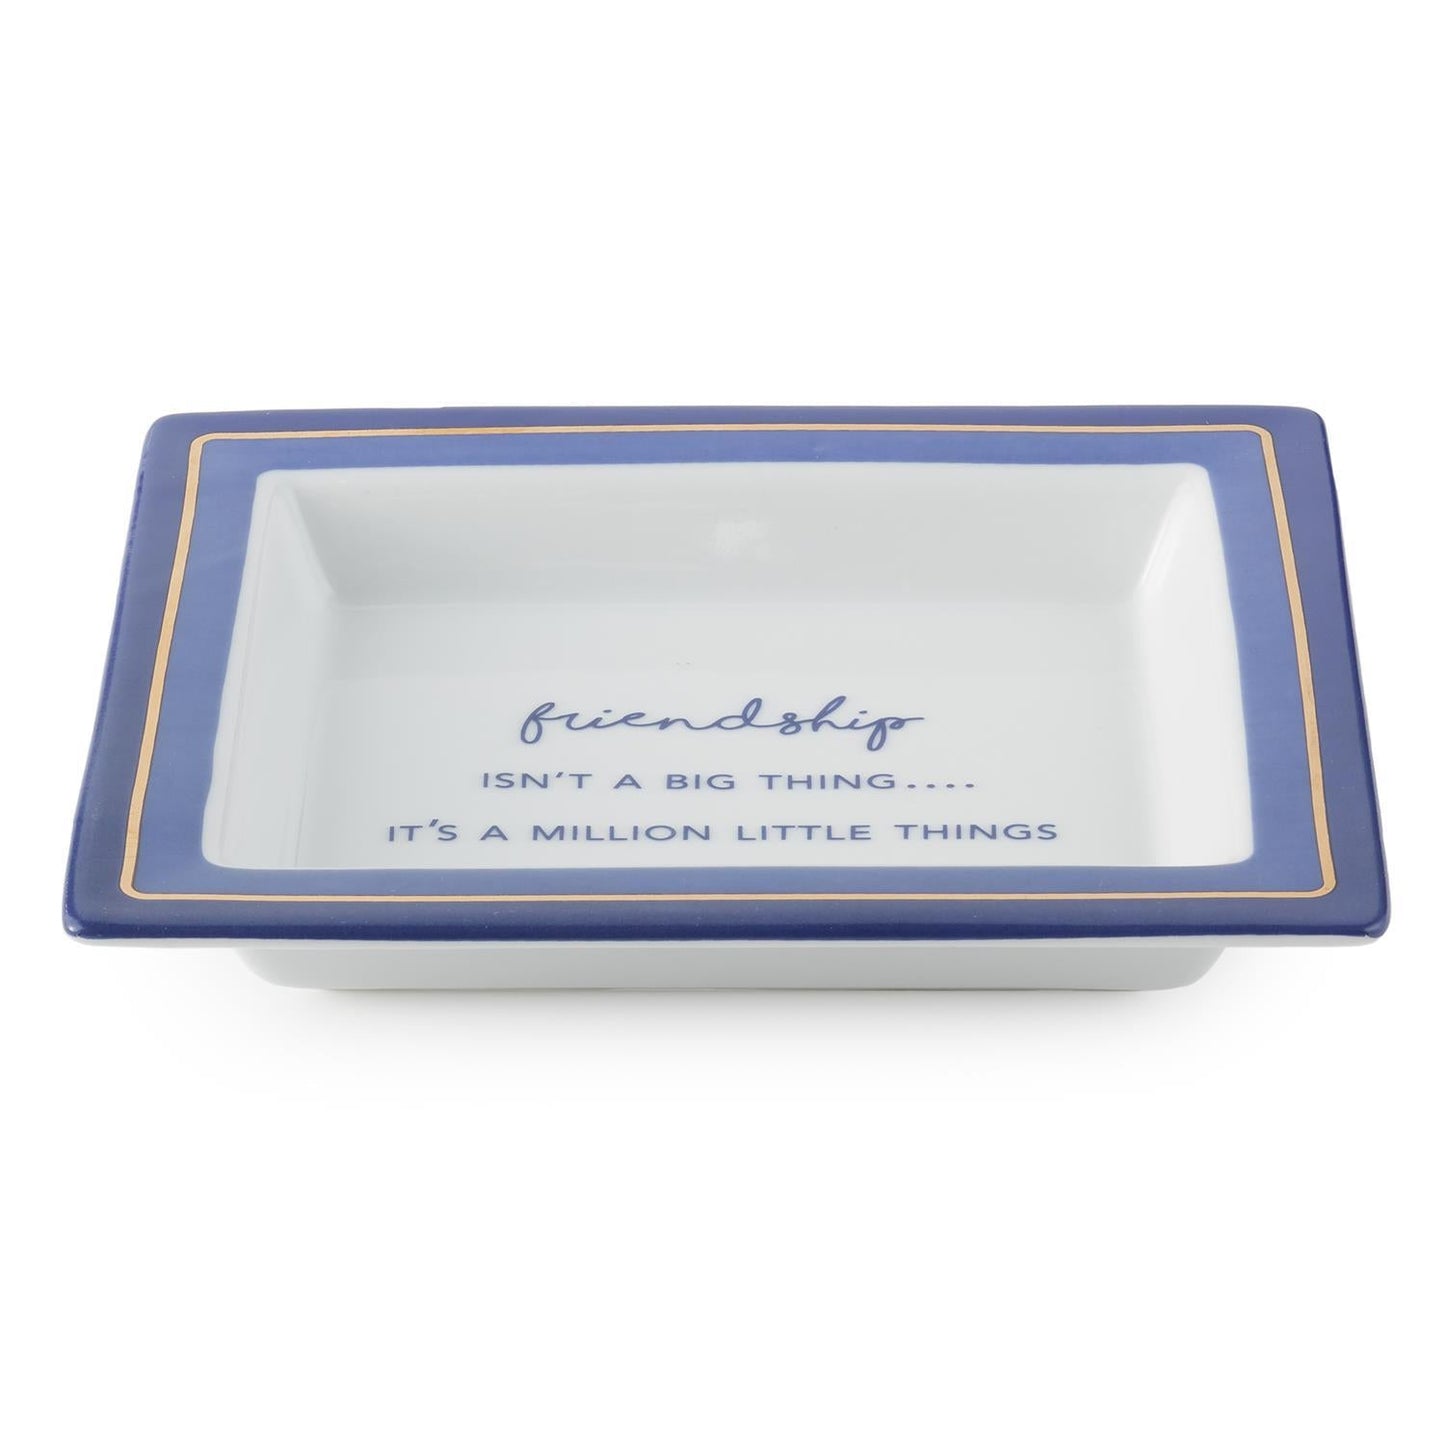 Wise Sayings Porcelain Tray in Gift Box "Friendship Isn't A Big Thing.... It's A Million Little Things" - Mellow Monkey